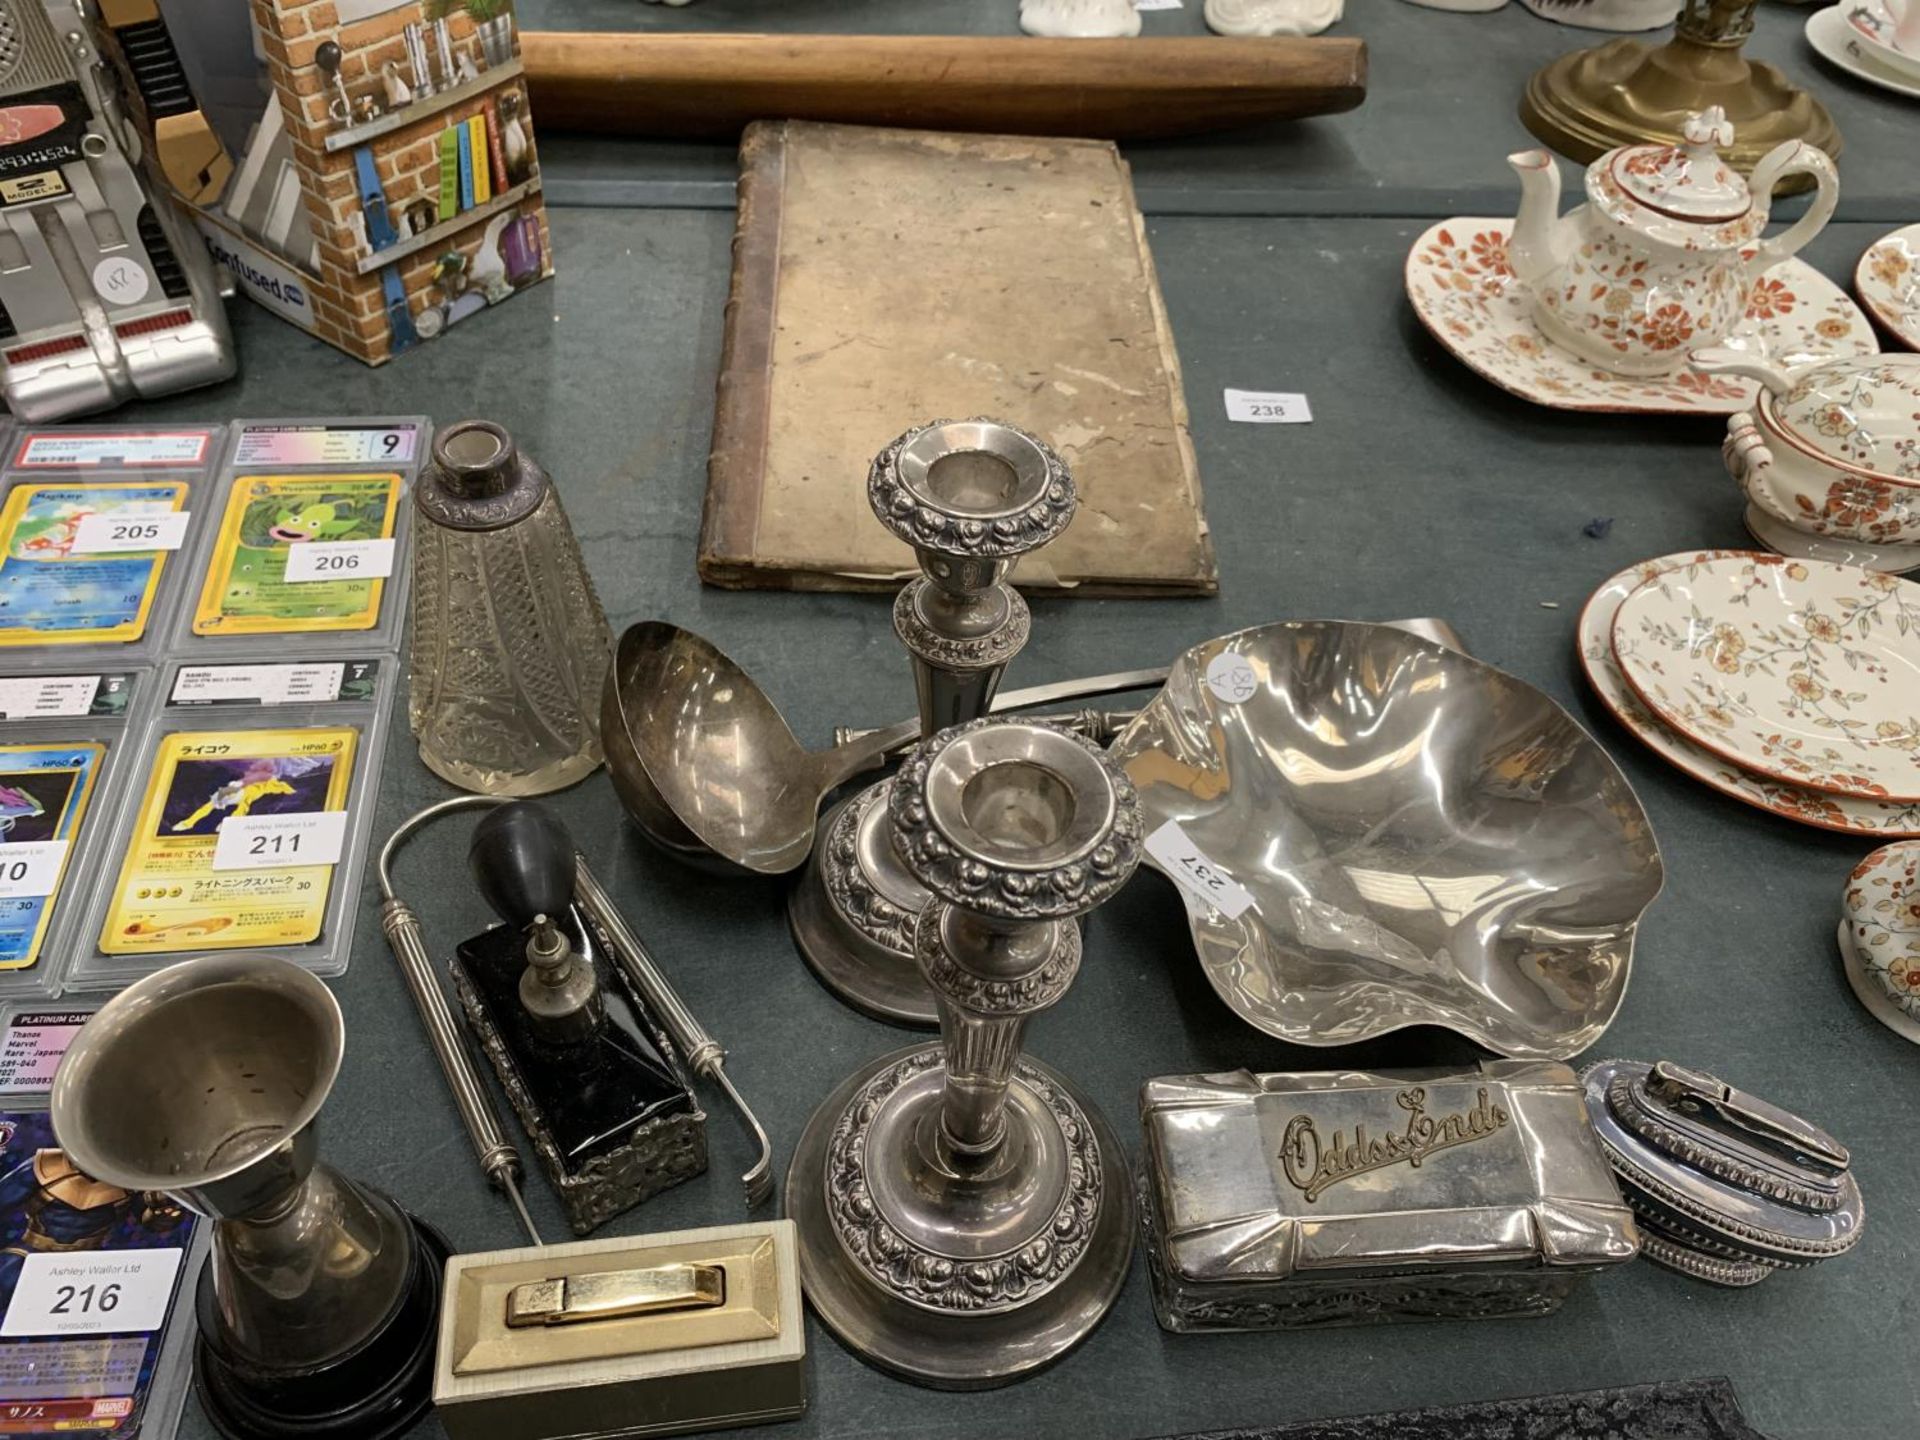 A QUANTITY OF SILVER PLATED ITEMS TO INCLUDE CANDLESTICKS, TABLE LIGHTERS, A LADEL, PERFUME